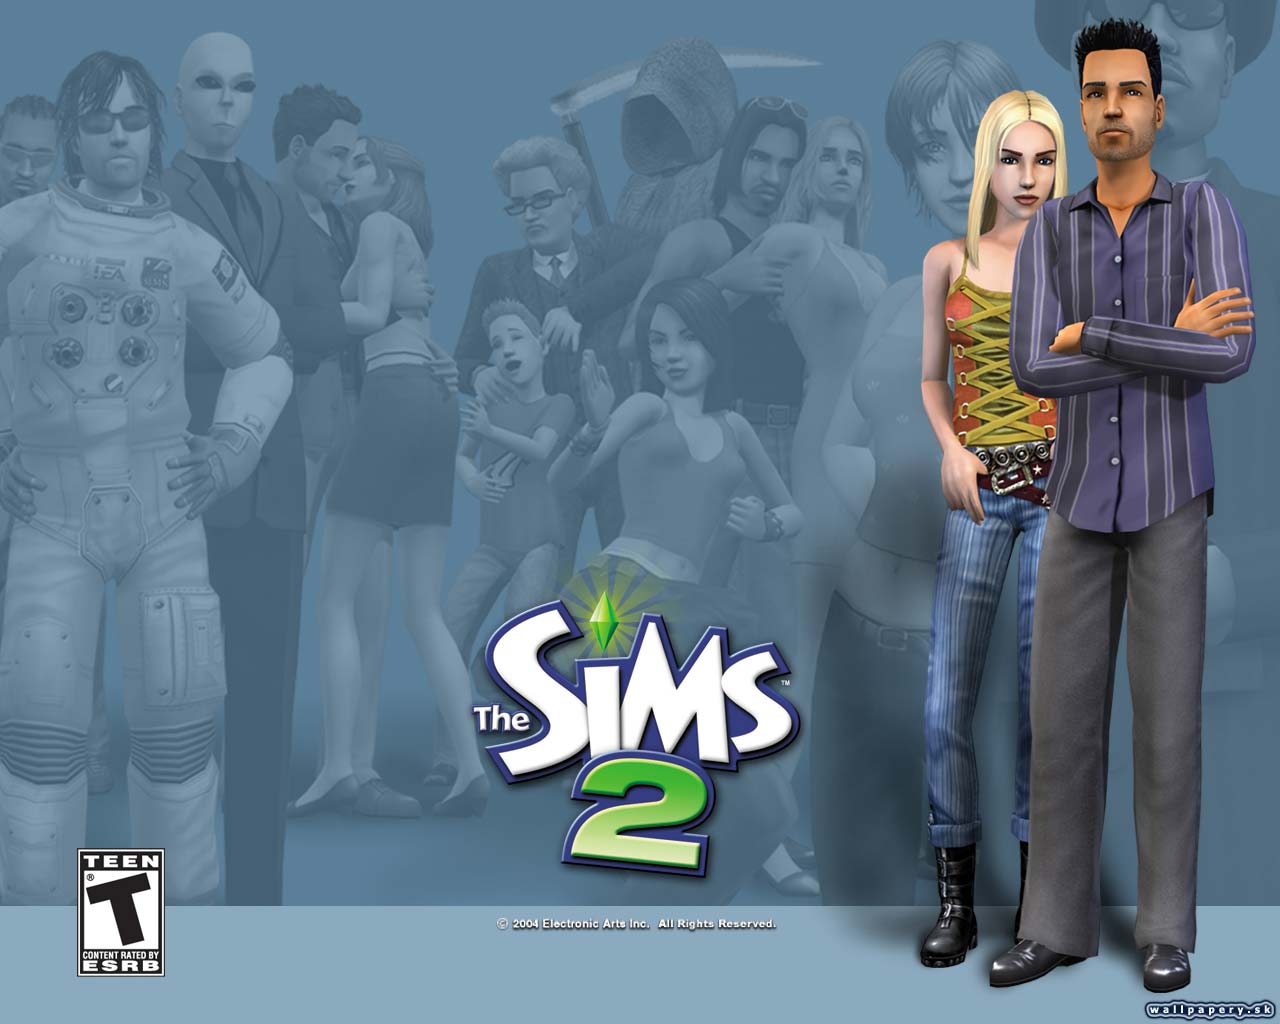 The Sims 2 - wallpaper 21